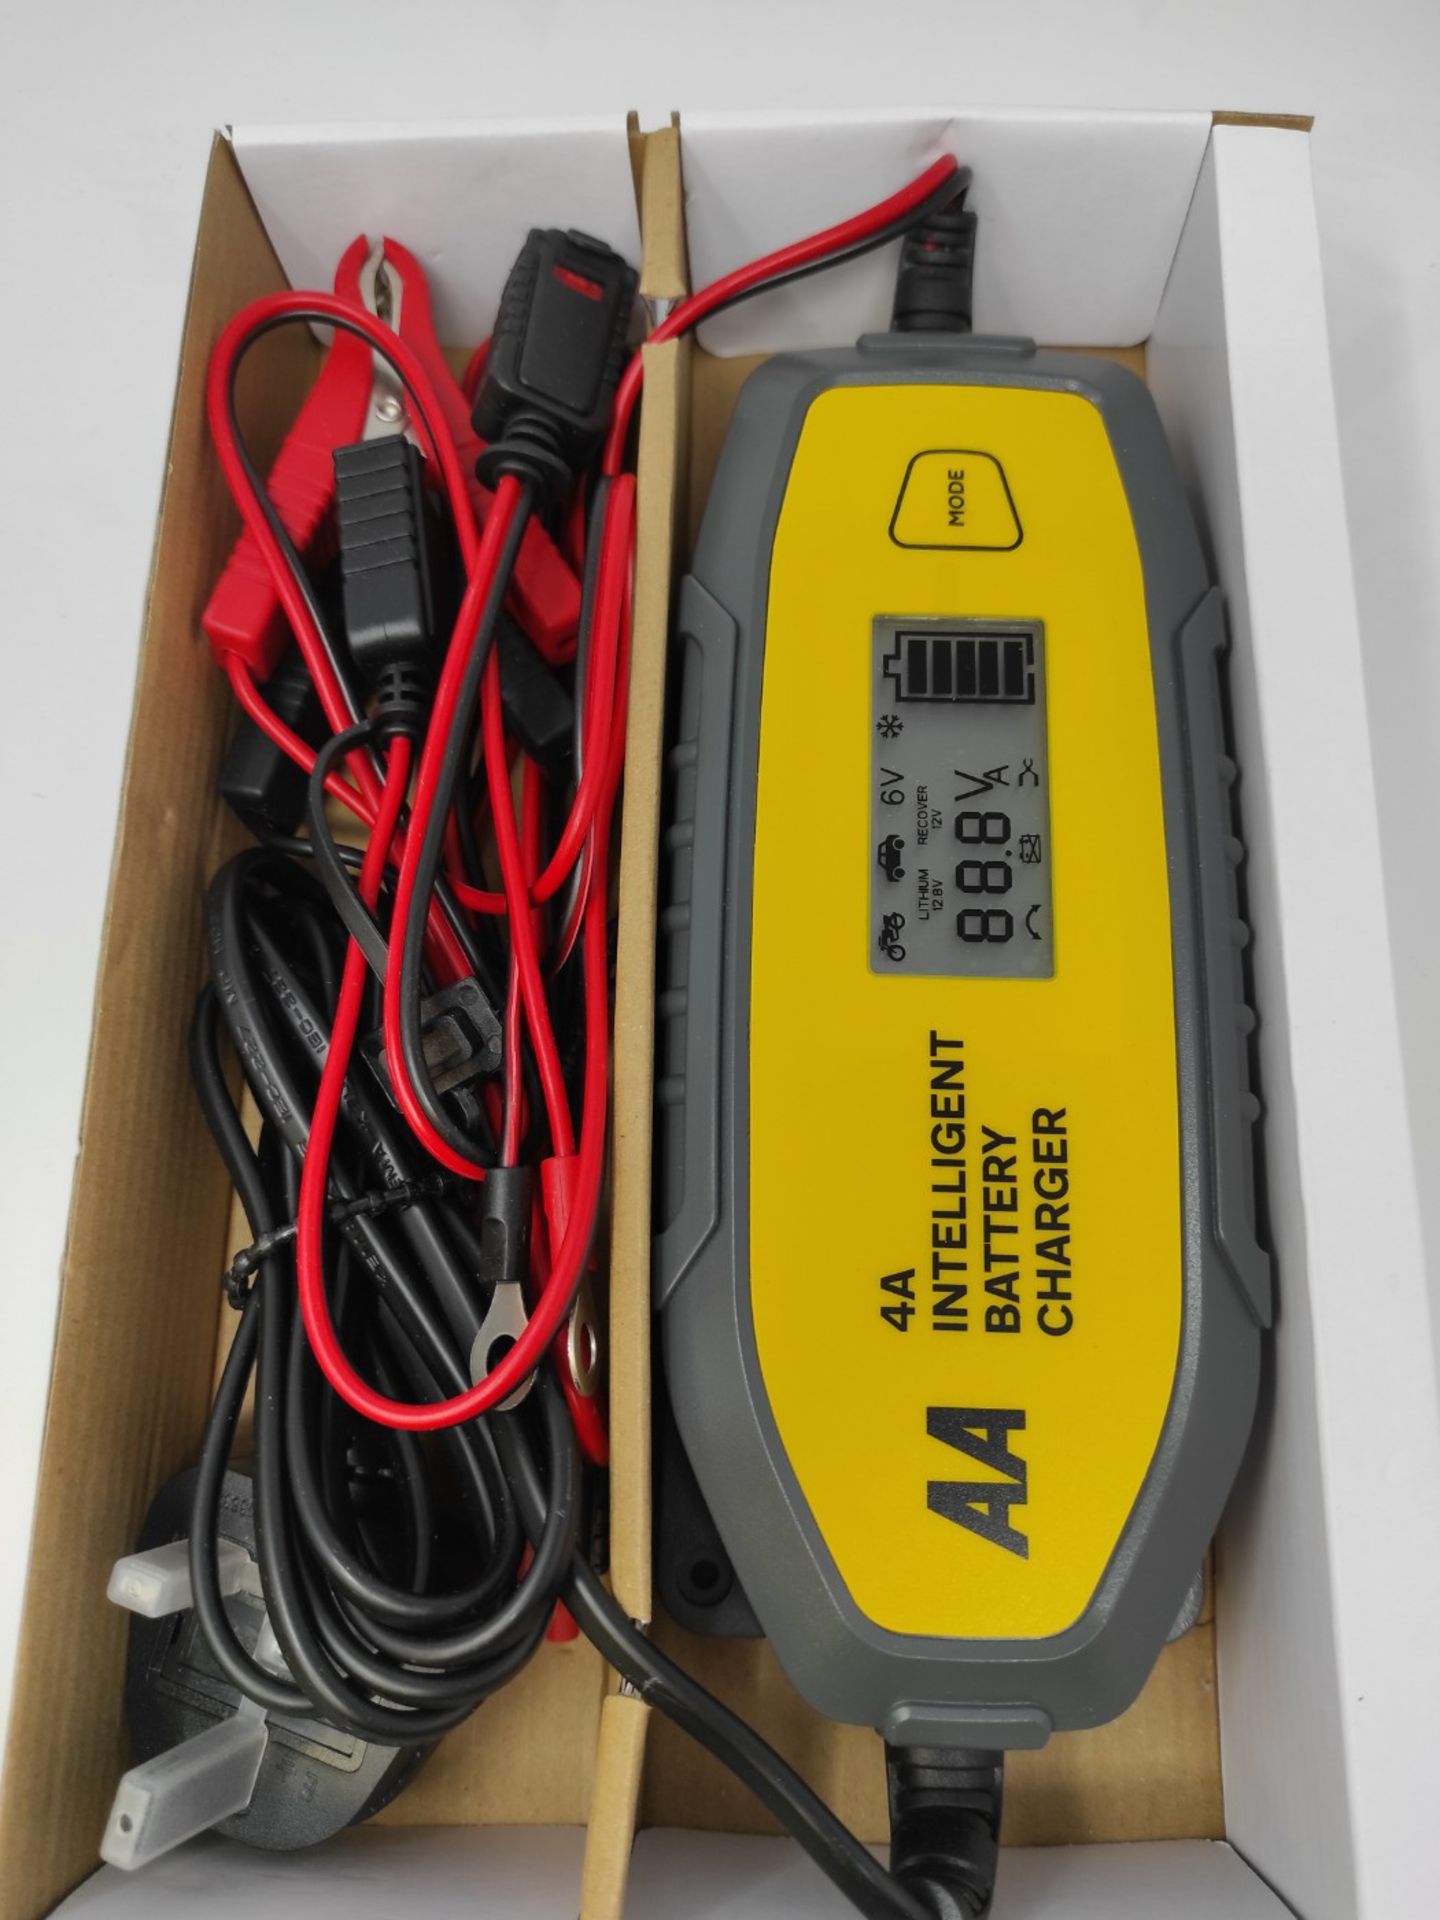 AA AA0725 4A Intelligent Car Battery Charger - LCD,8 Stage, Recover Dead Battery,Up To - Bild 3 aus 3